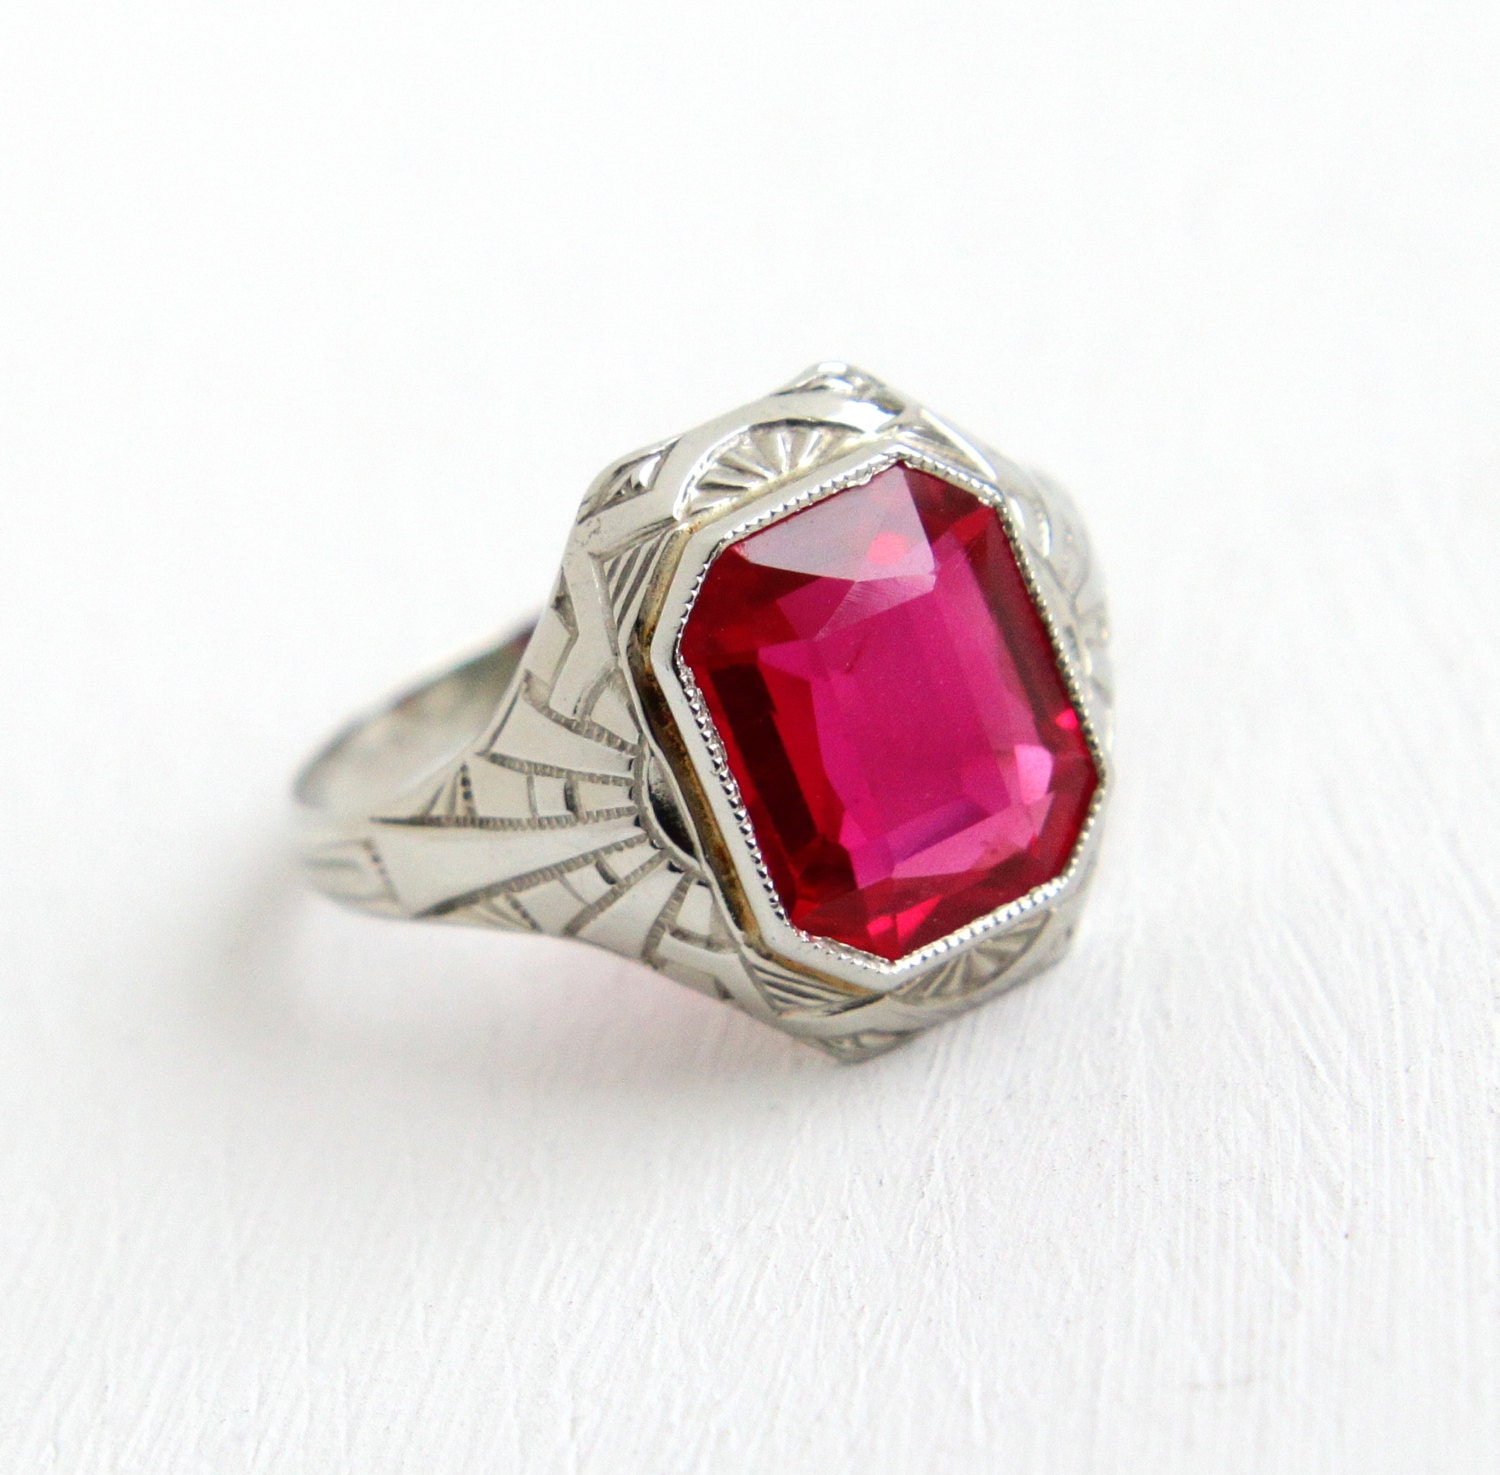 SALE Vintage 10k White Gold Created Ruby Ring Antique Size